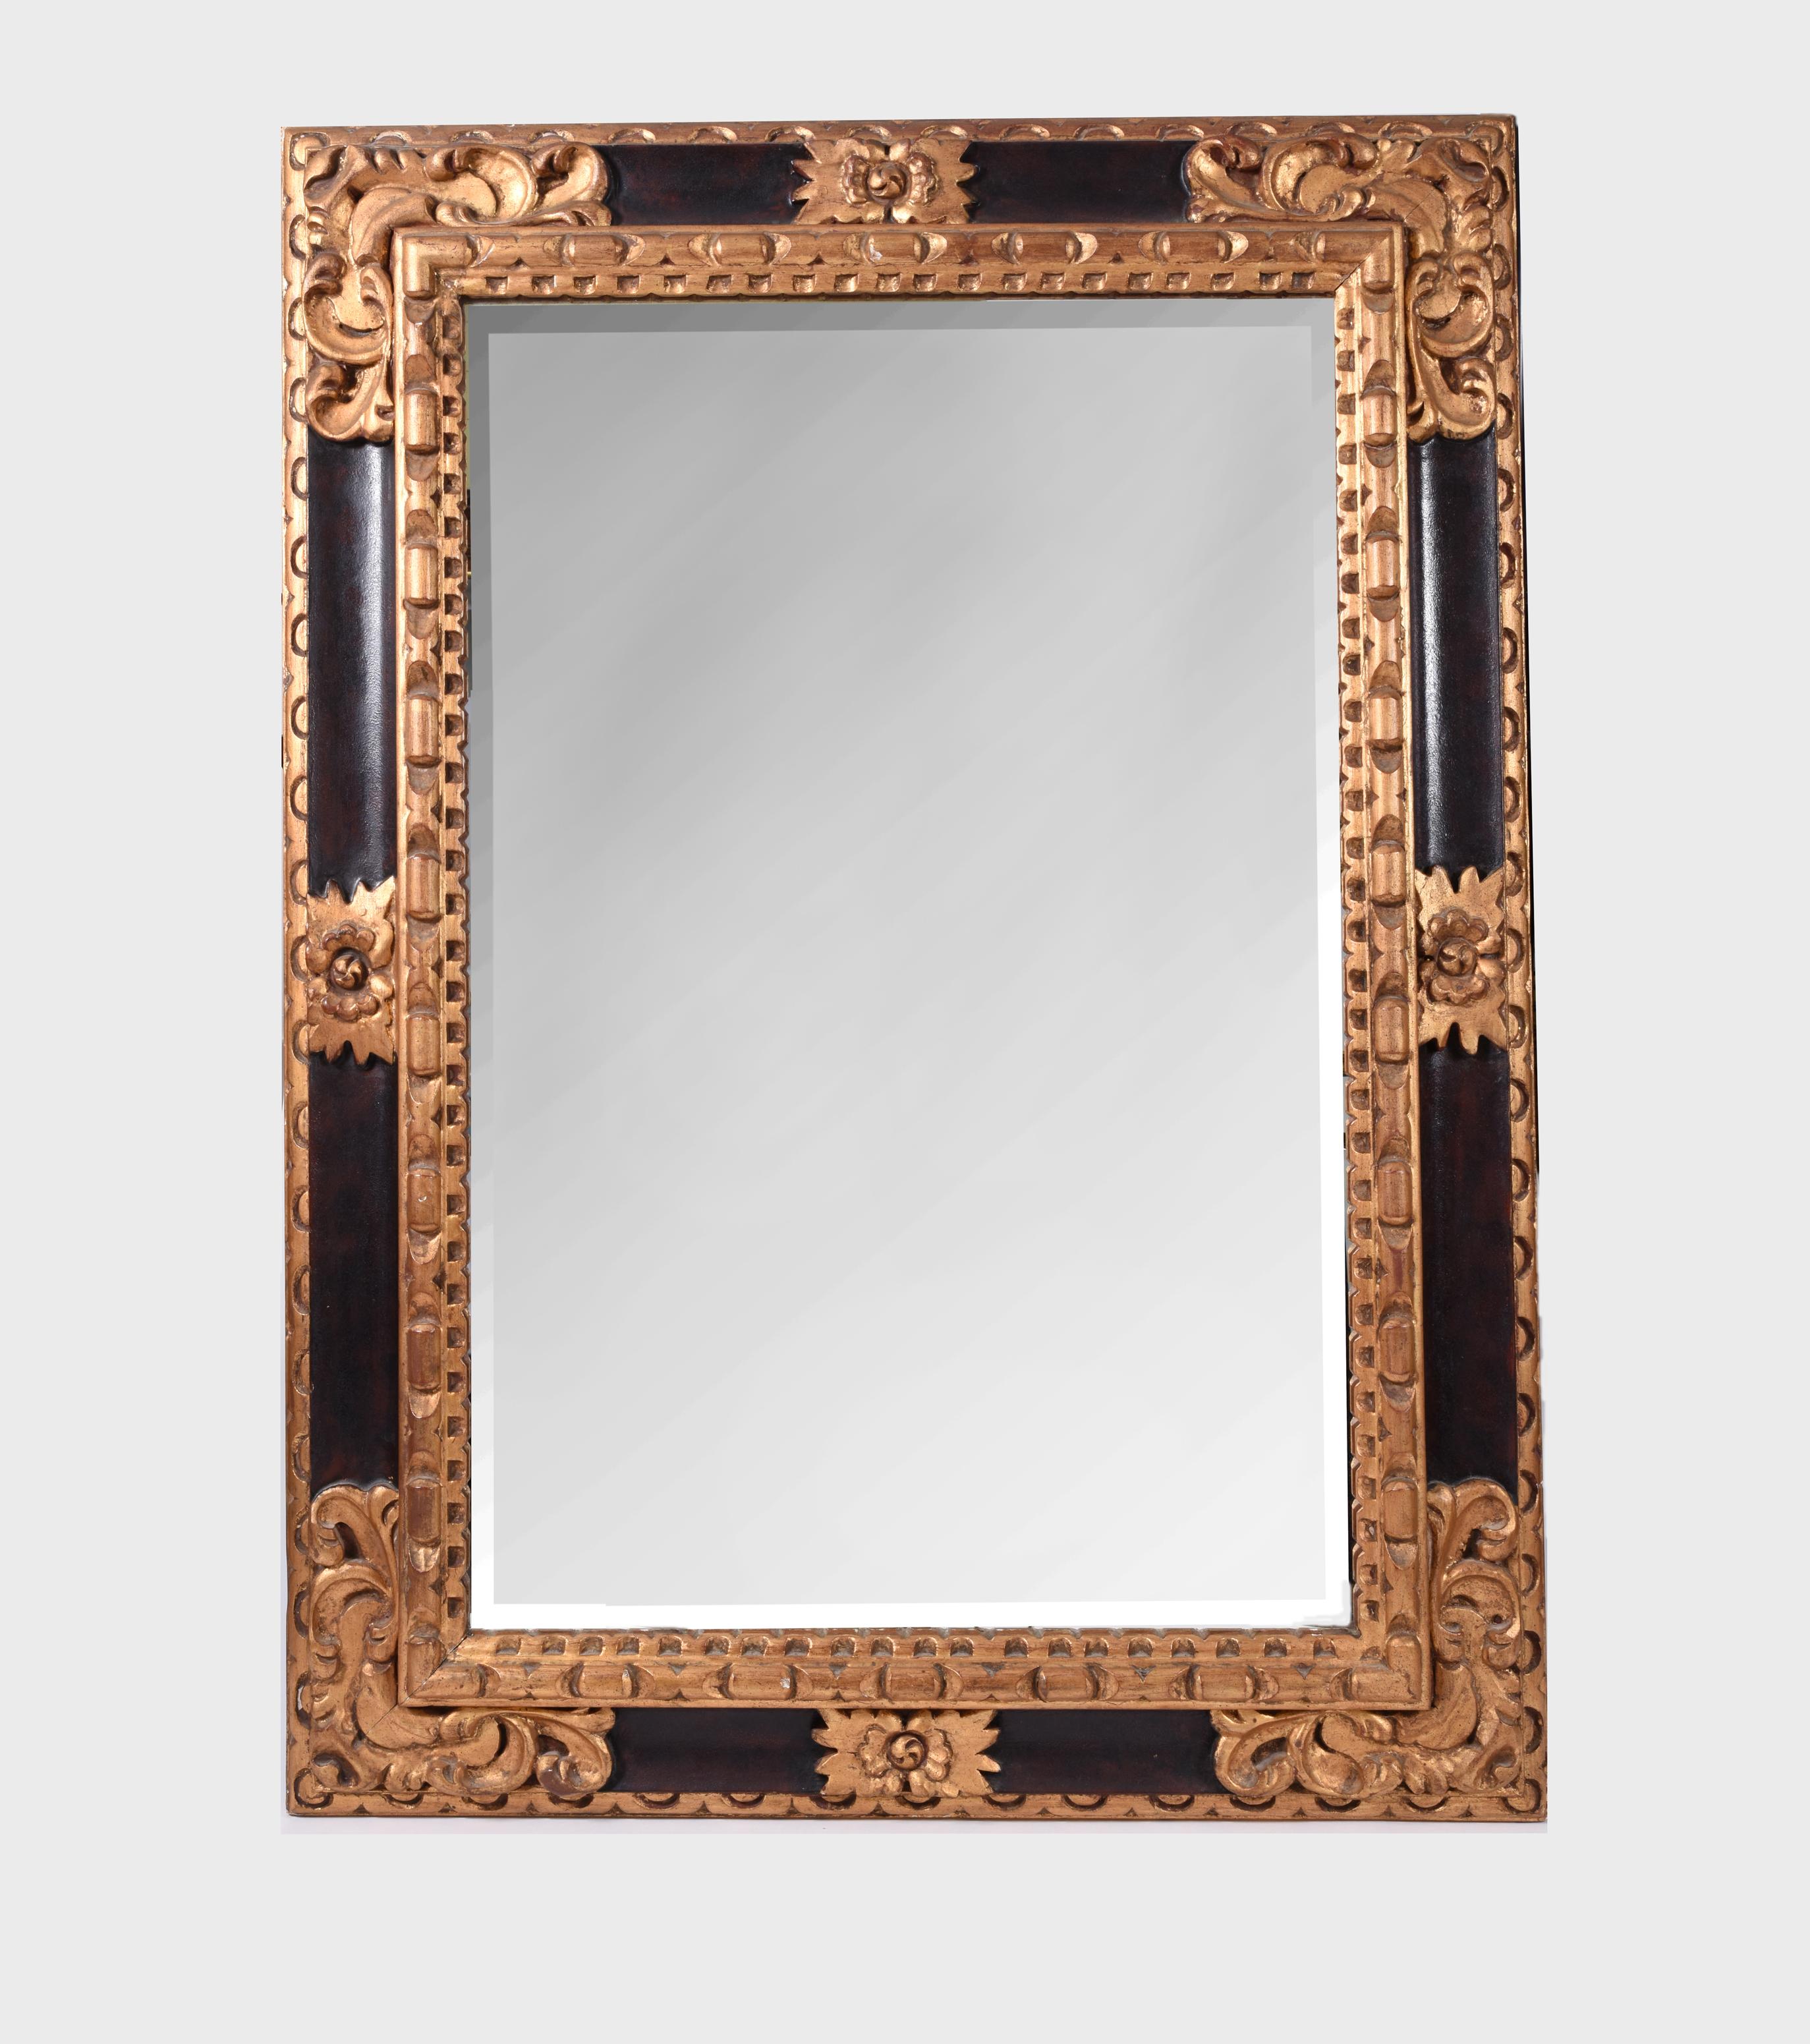 Mid-20th century giltwood framed design details hanging wall mirror. The hanging wall mirror measure about 45 inches length x 33 inches width.